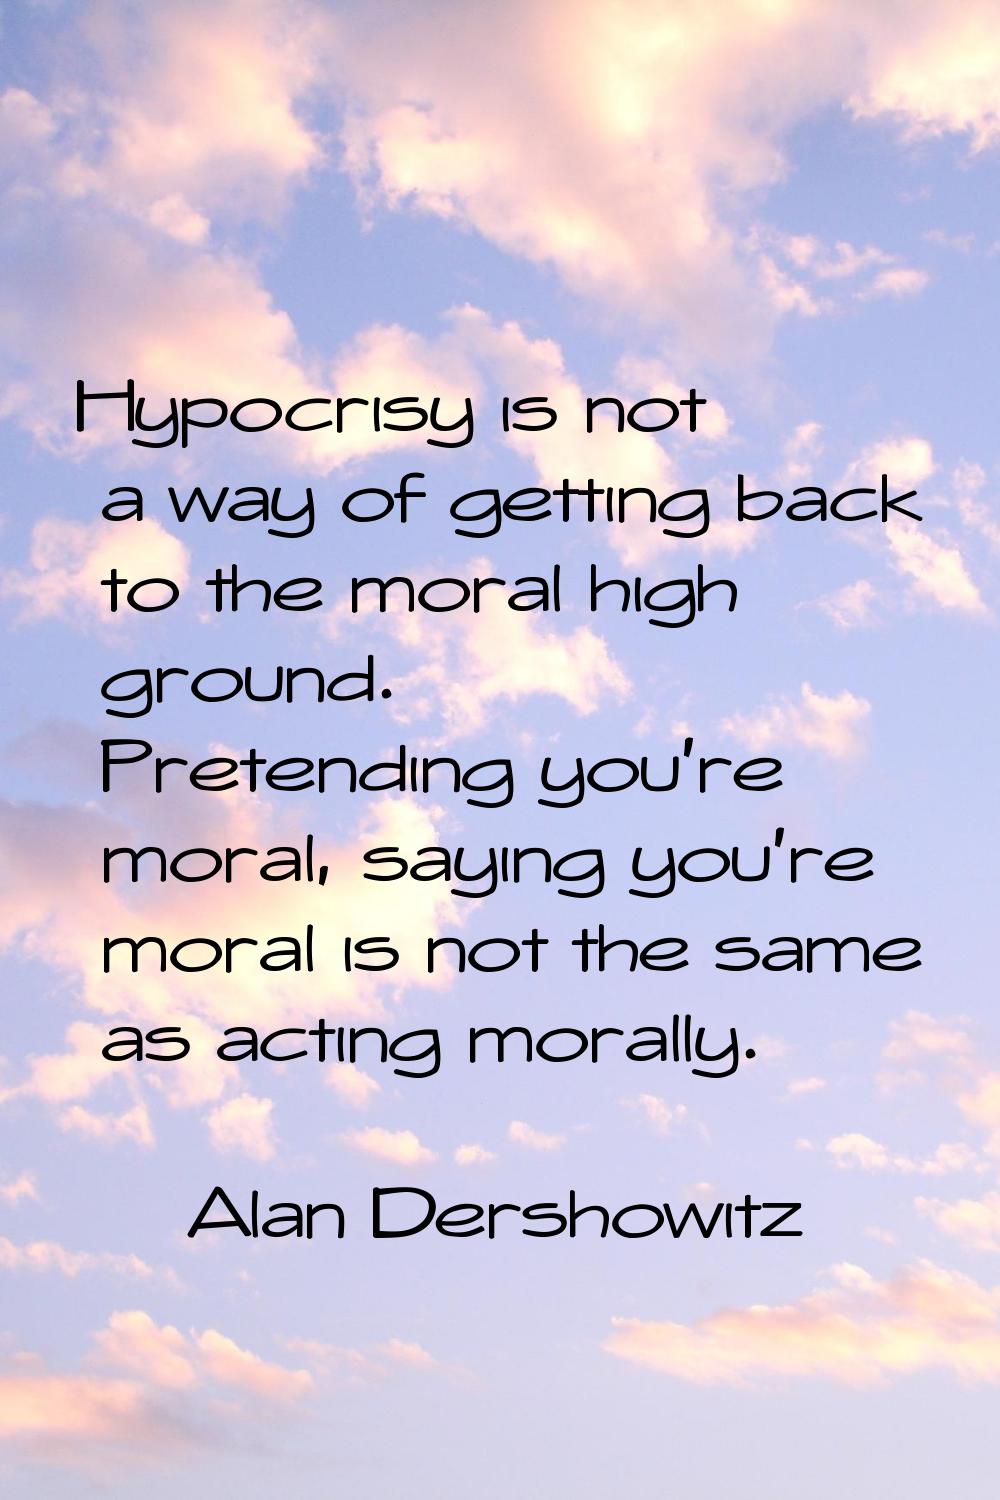 Hypocrisy is not a way of getting back to the moral high ground. Pretending you're moral, saying yo